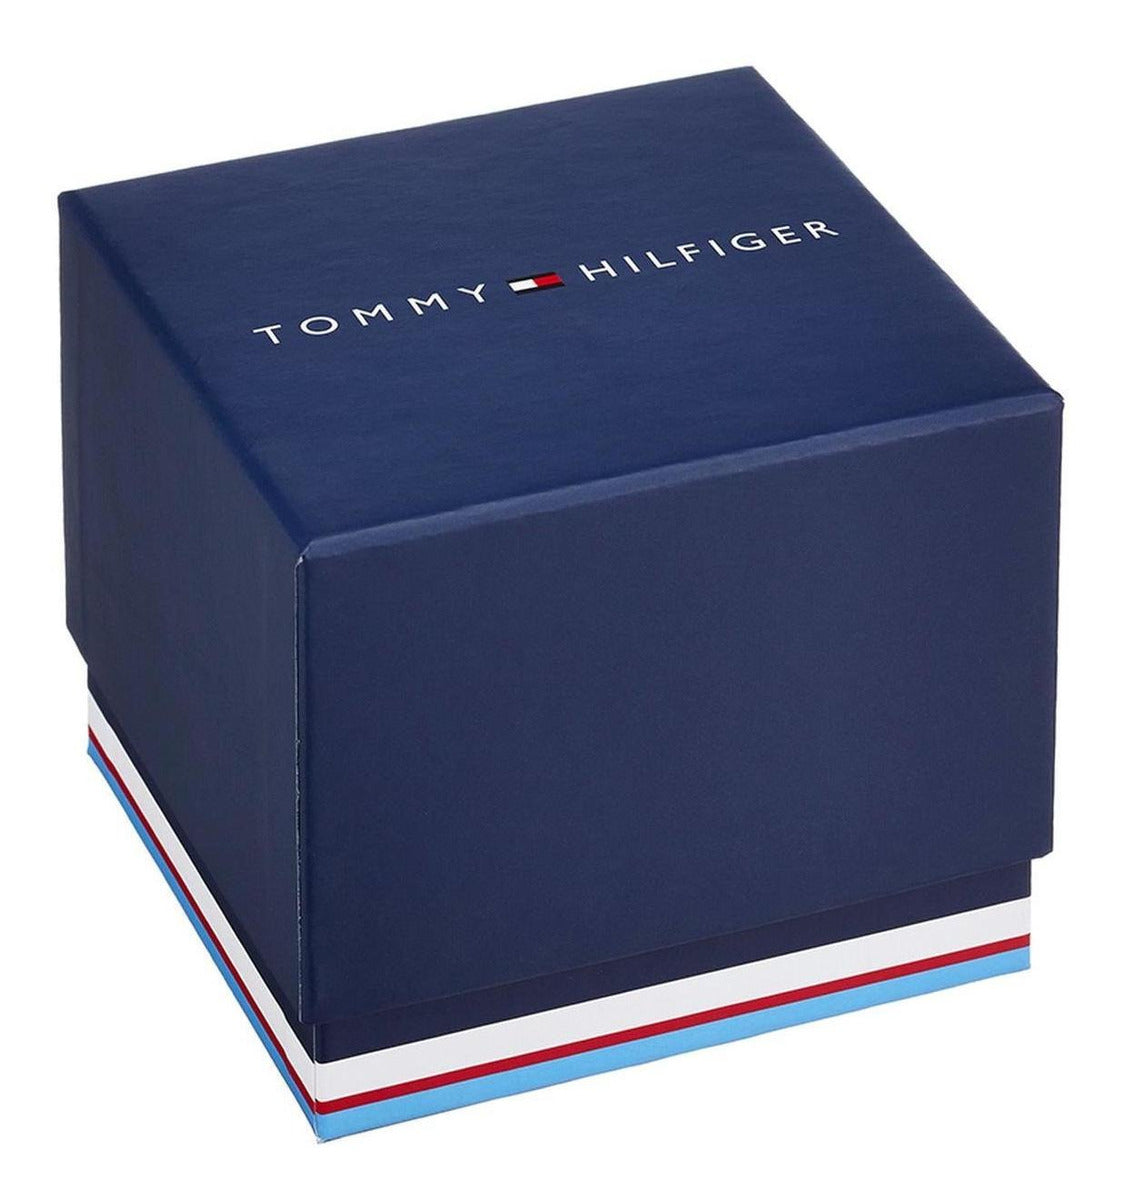 Reloj Tommy Hilfiger Mujer Acero inoxidable 1782578 Florence